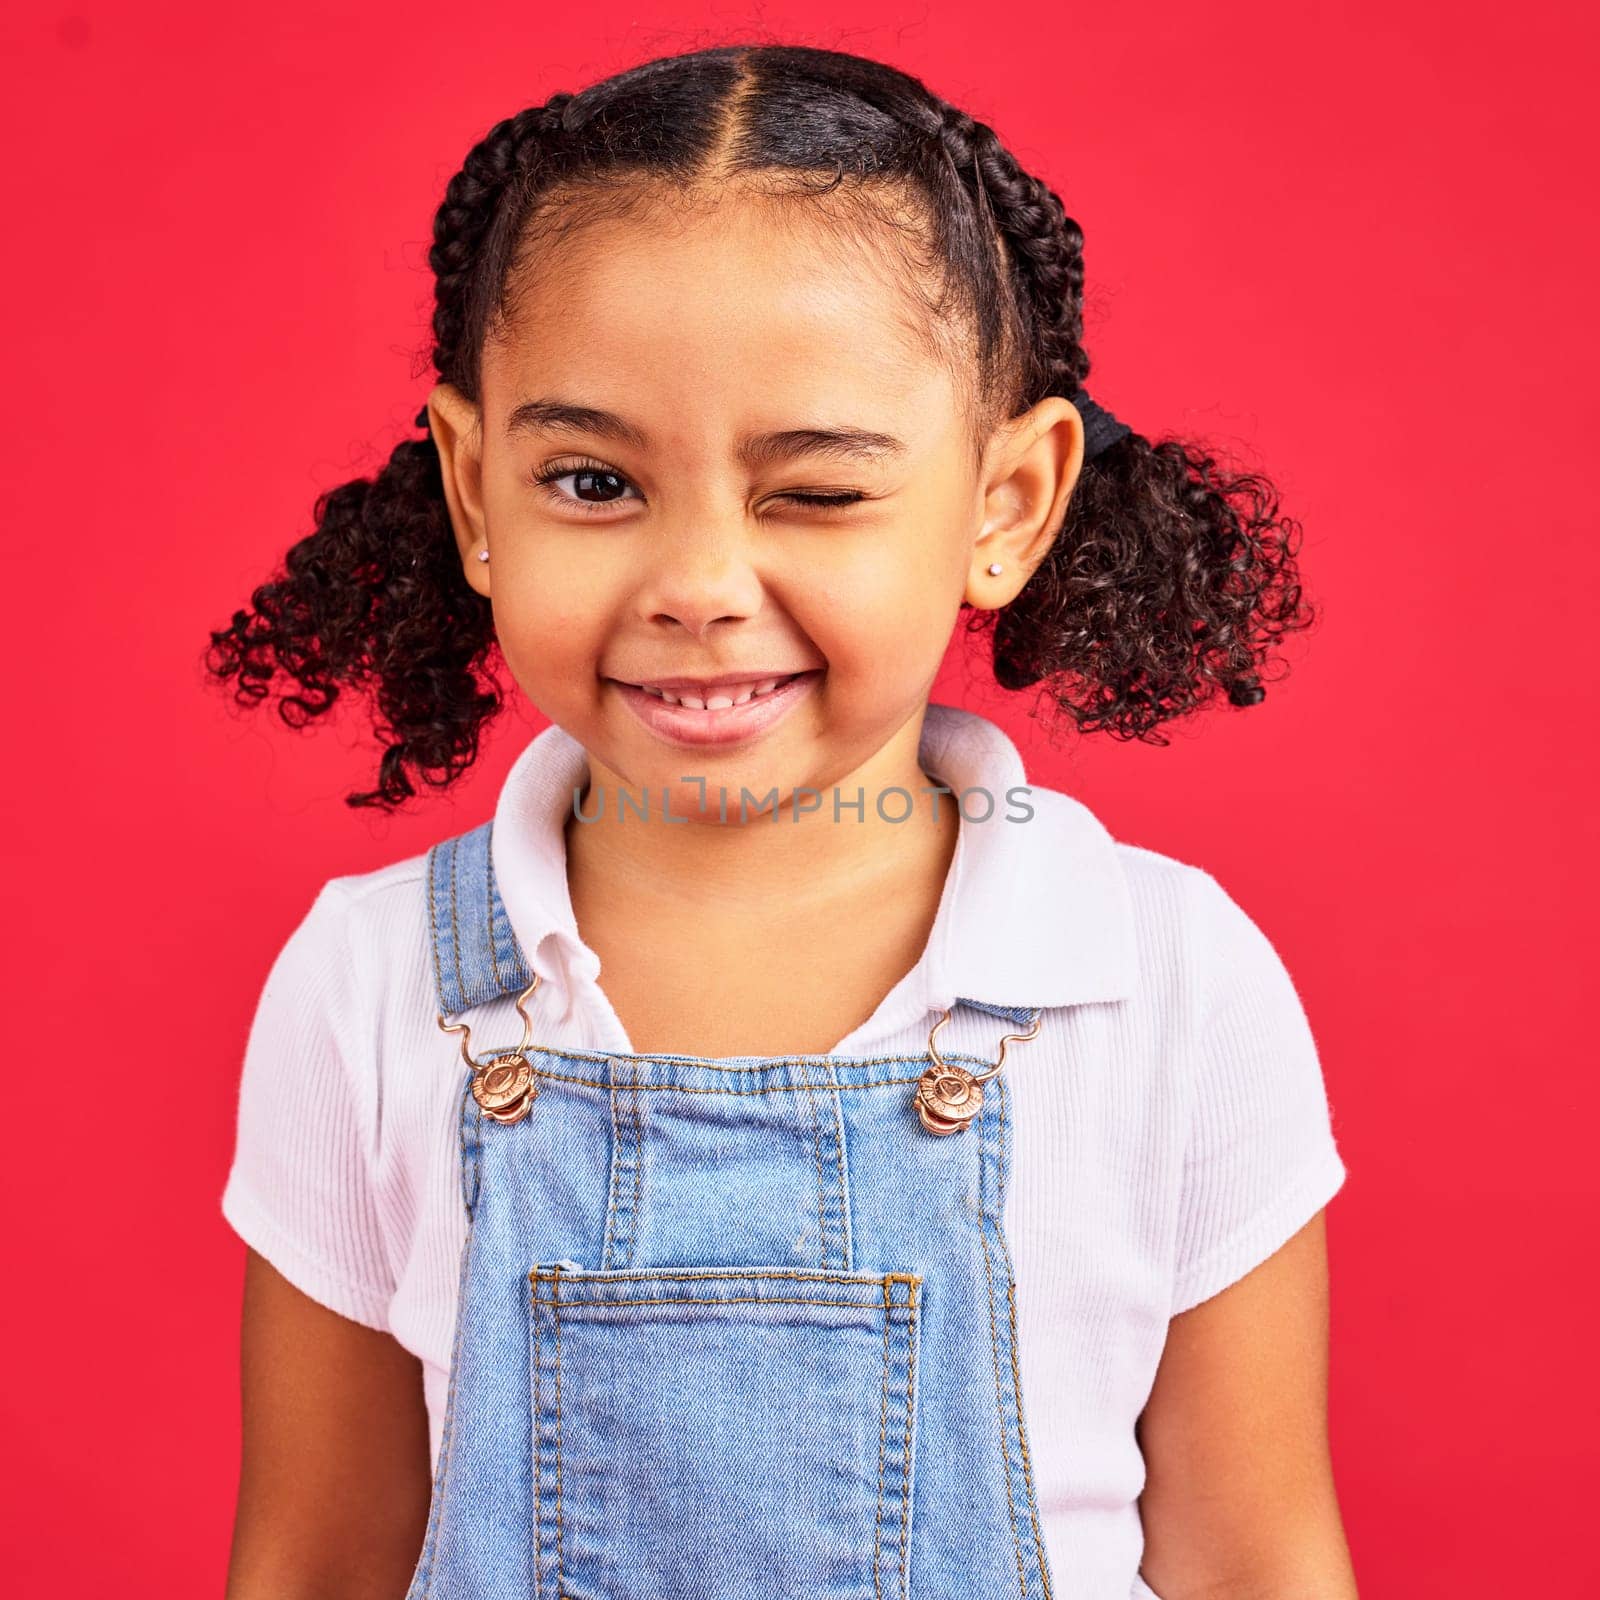 Portrait, wink and a black child on a red background in studio having fun or feeling carefree. Kids, fashion and smile with a happy female child winking inside on a color wall while looking funny.